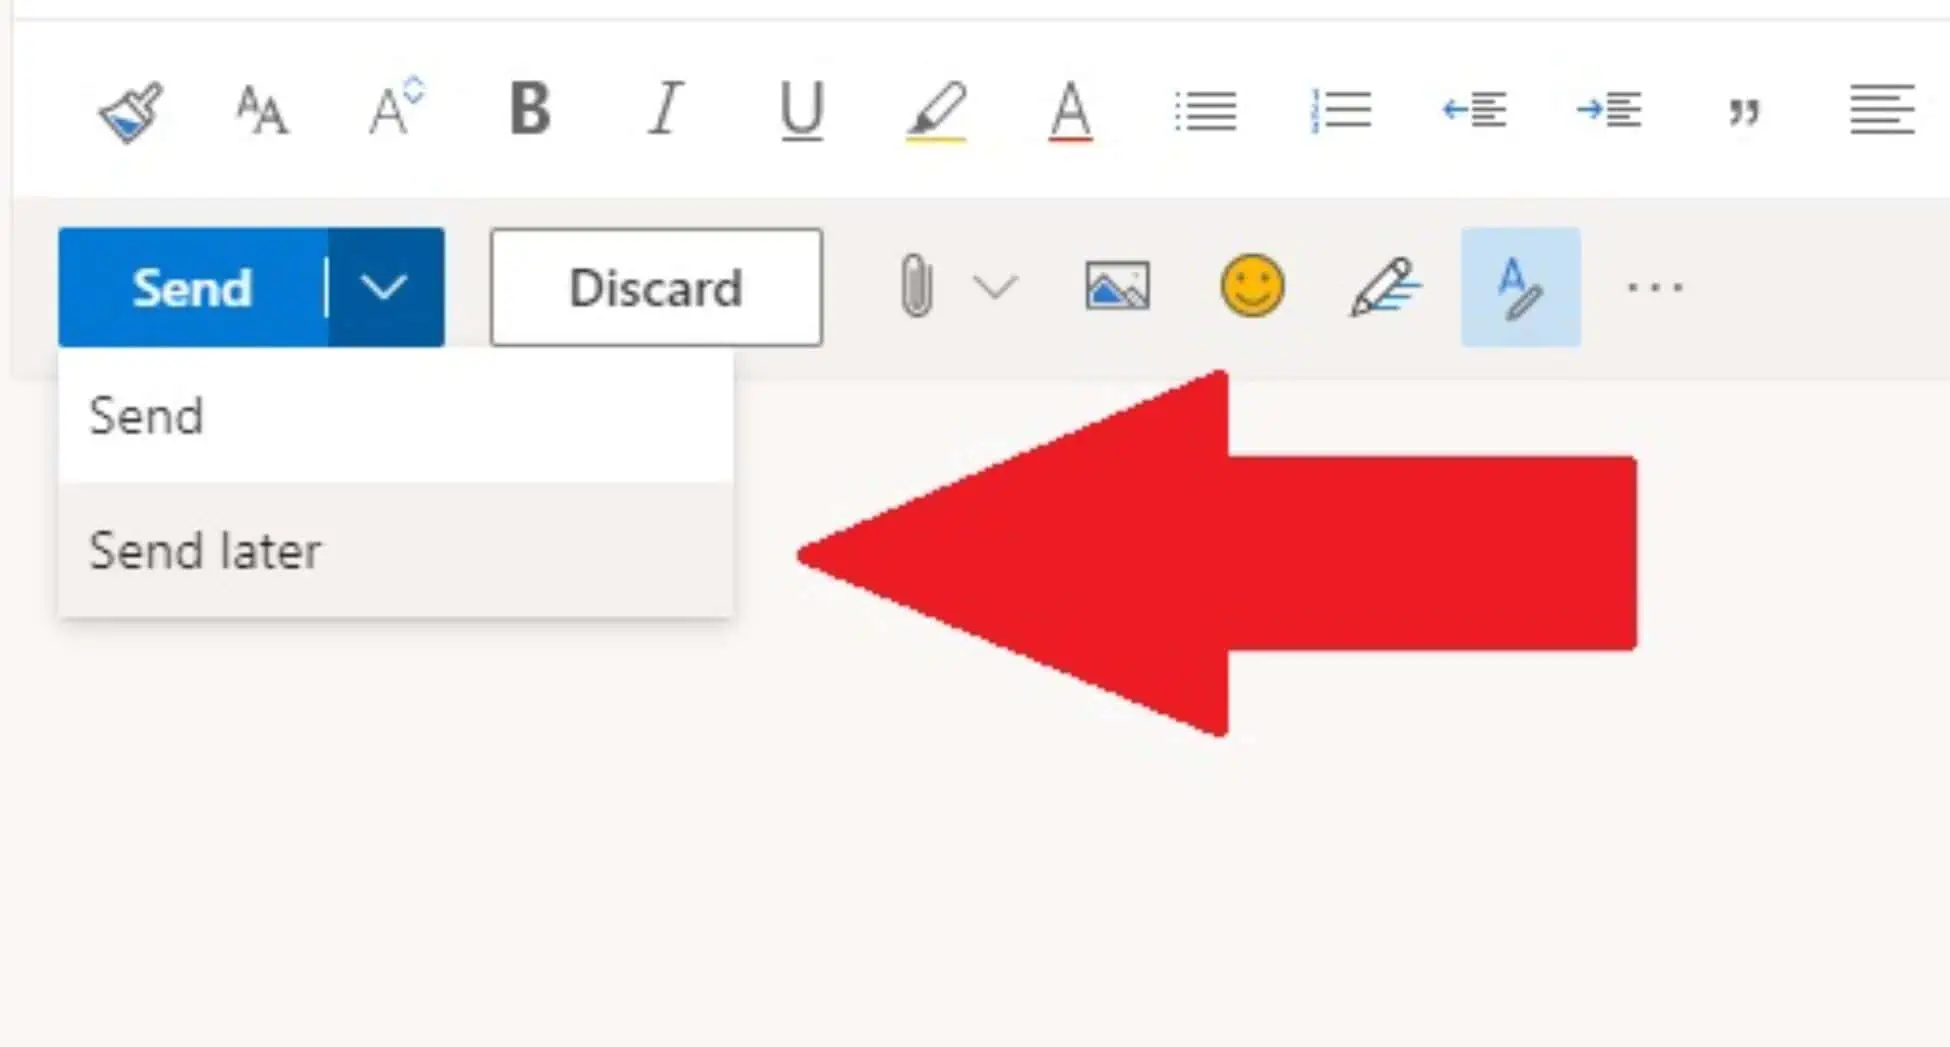 You can now schedule an email using ‘Send later’ feature on Outlook for web